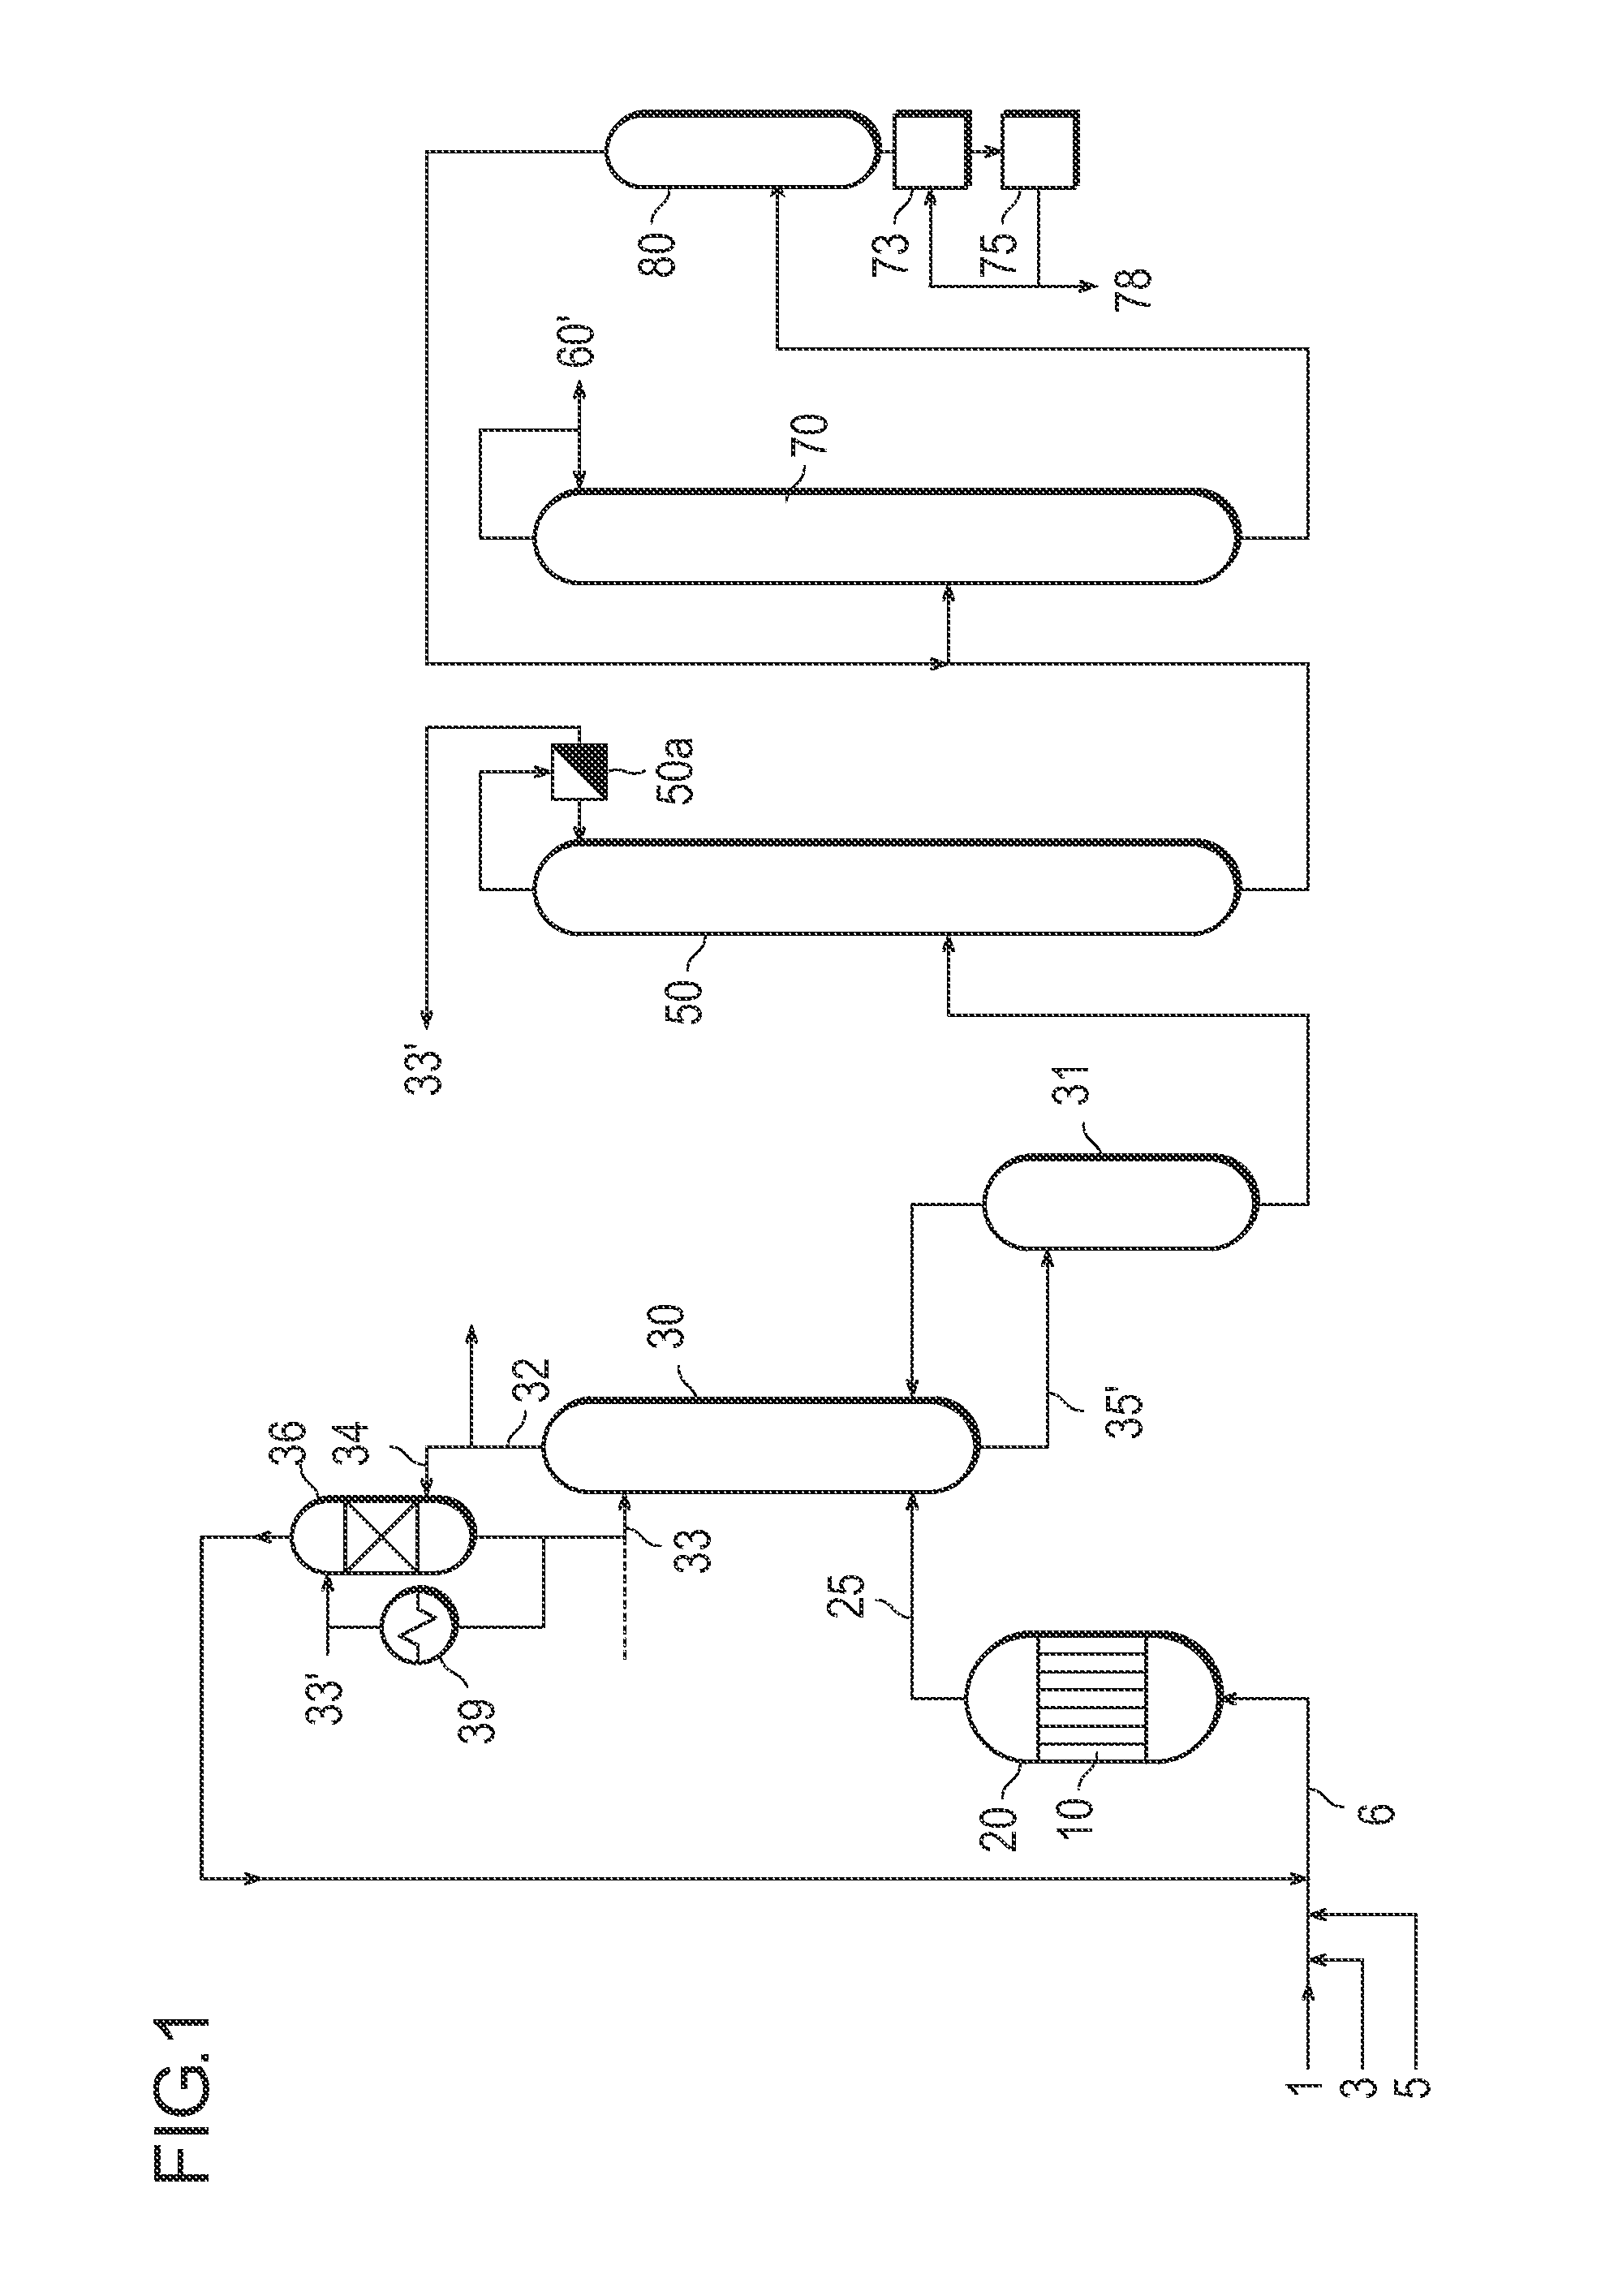 Process for producing acrylic acid, and process for producing hydrophilic resin and process for producing water absorptive resin using the process